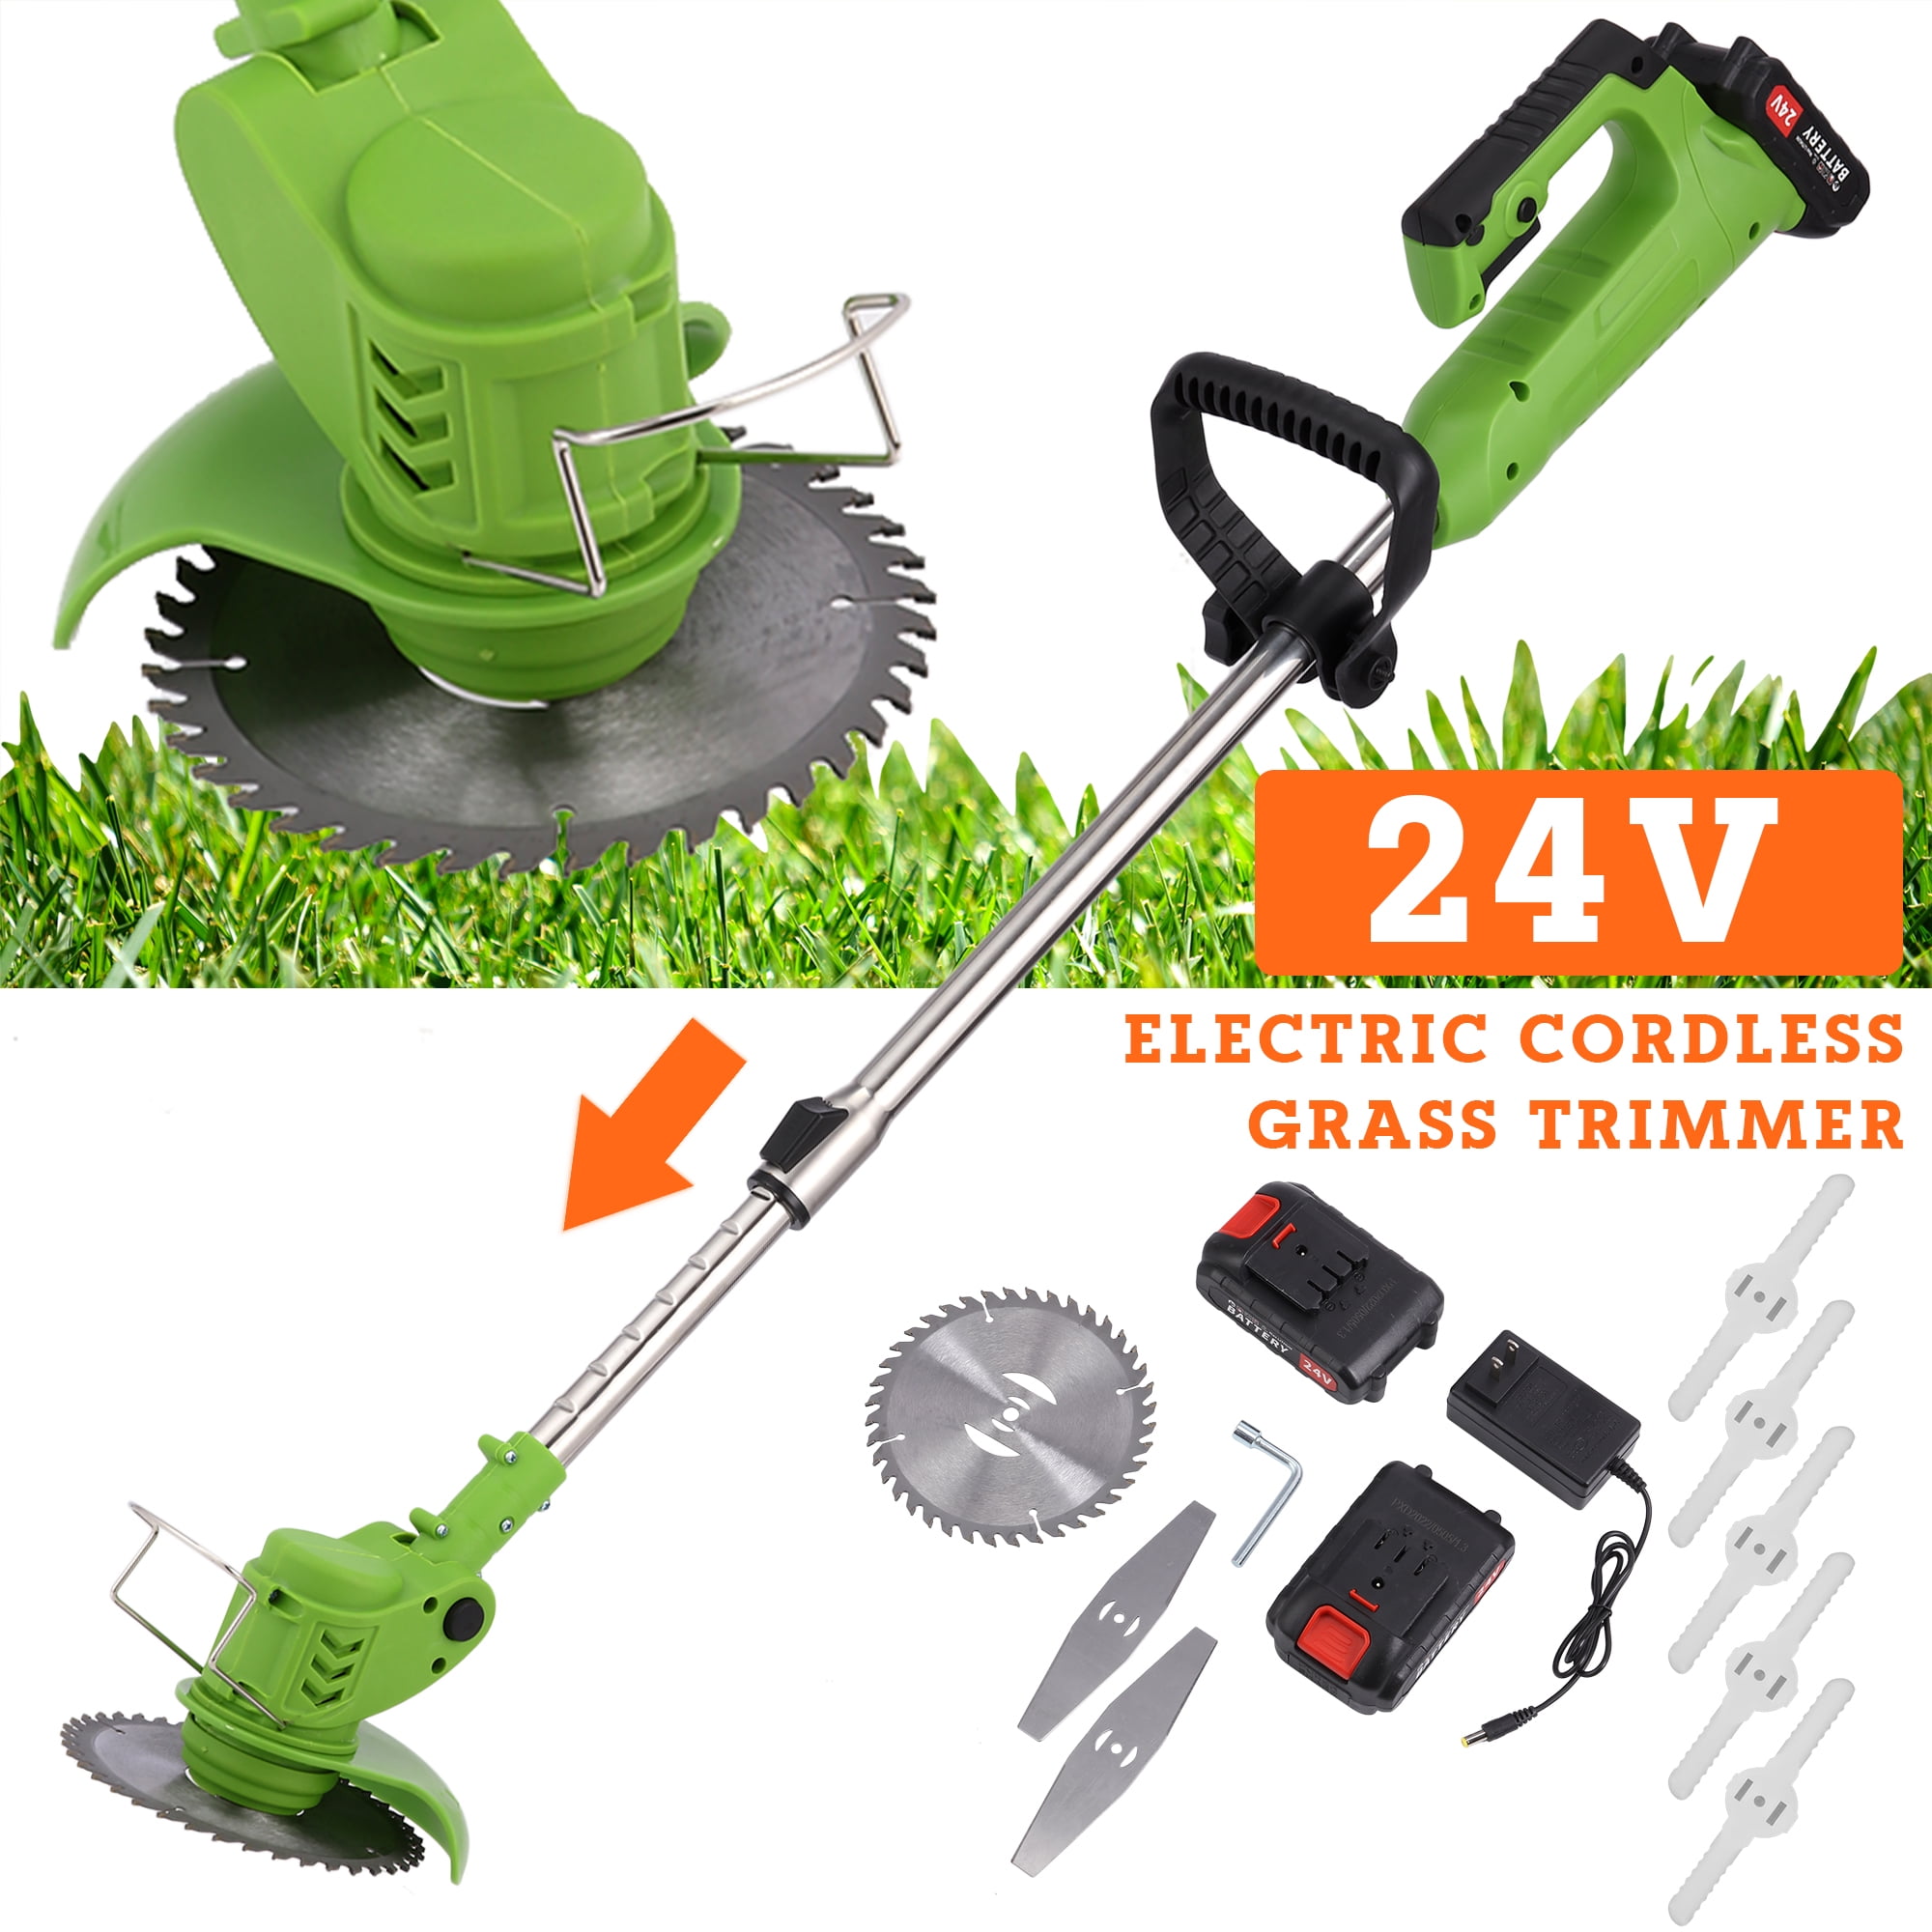 Green Cordless Electric Trimmer Grass Trimmer,String Trimmer,Lawn Mower,Cordless String Grass Trimmer Weed Eater with 24V Lithium-ion Batteries  USA in Stock 